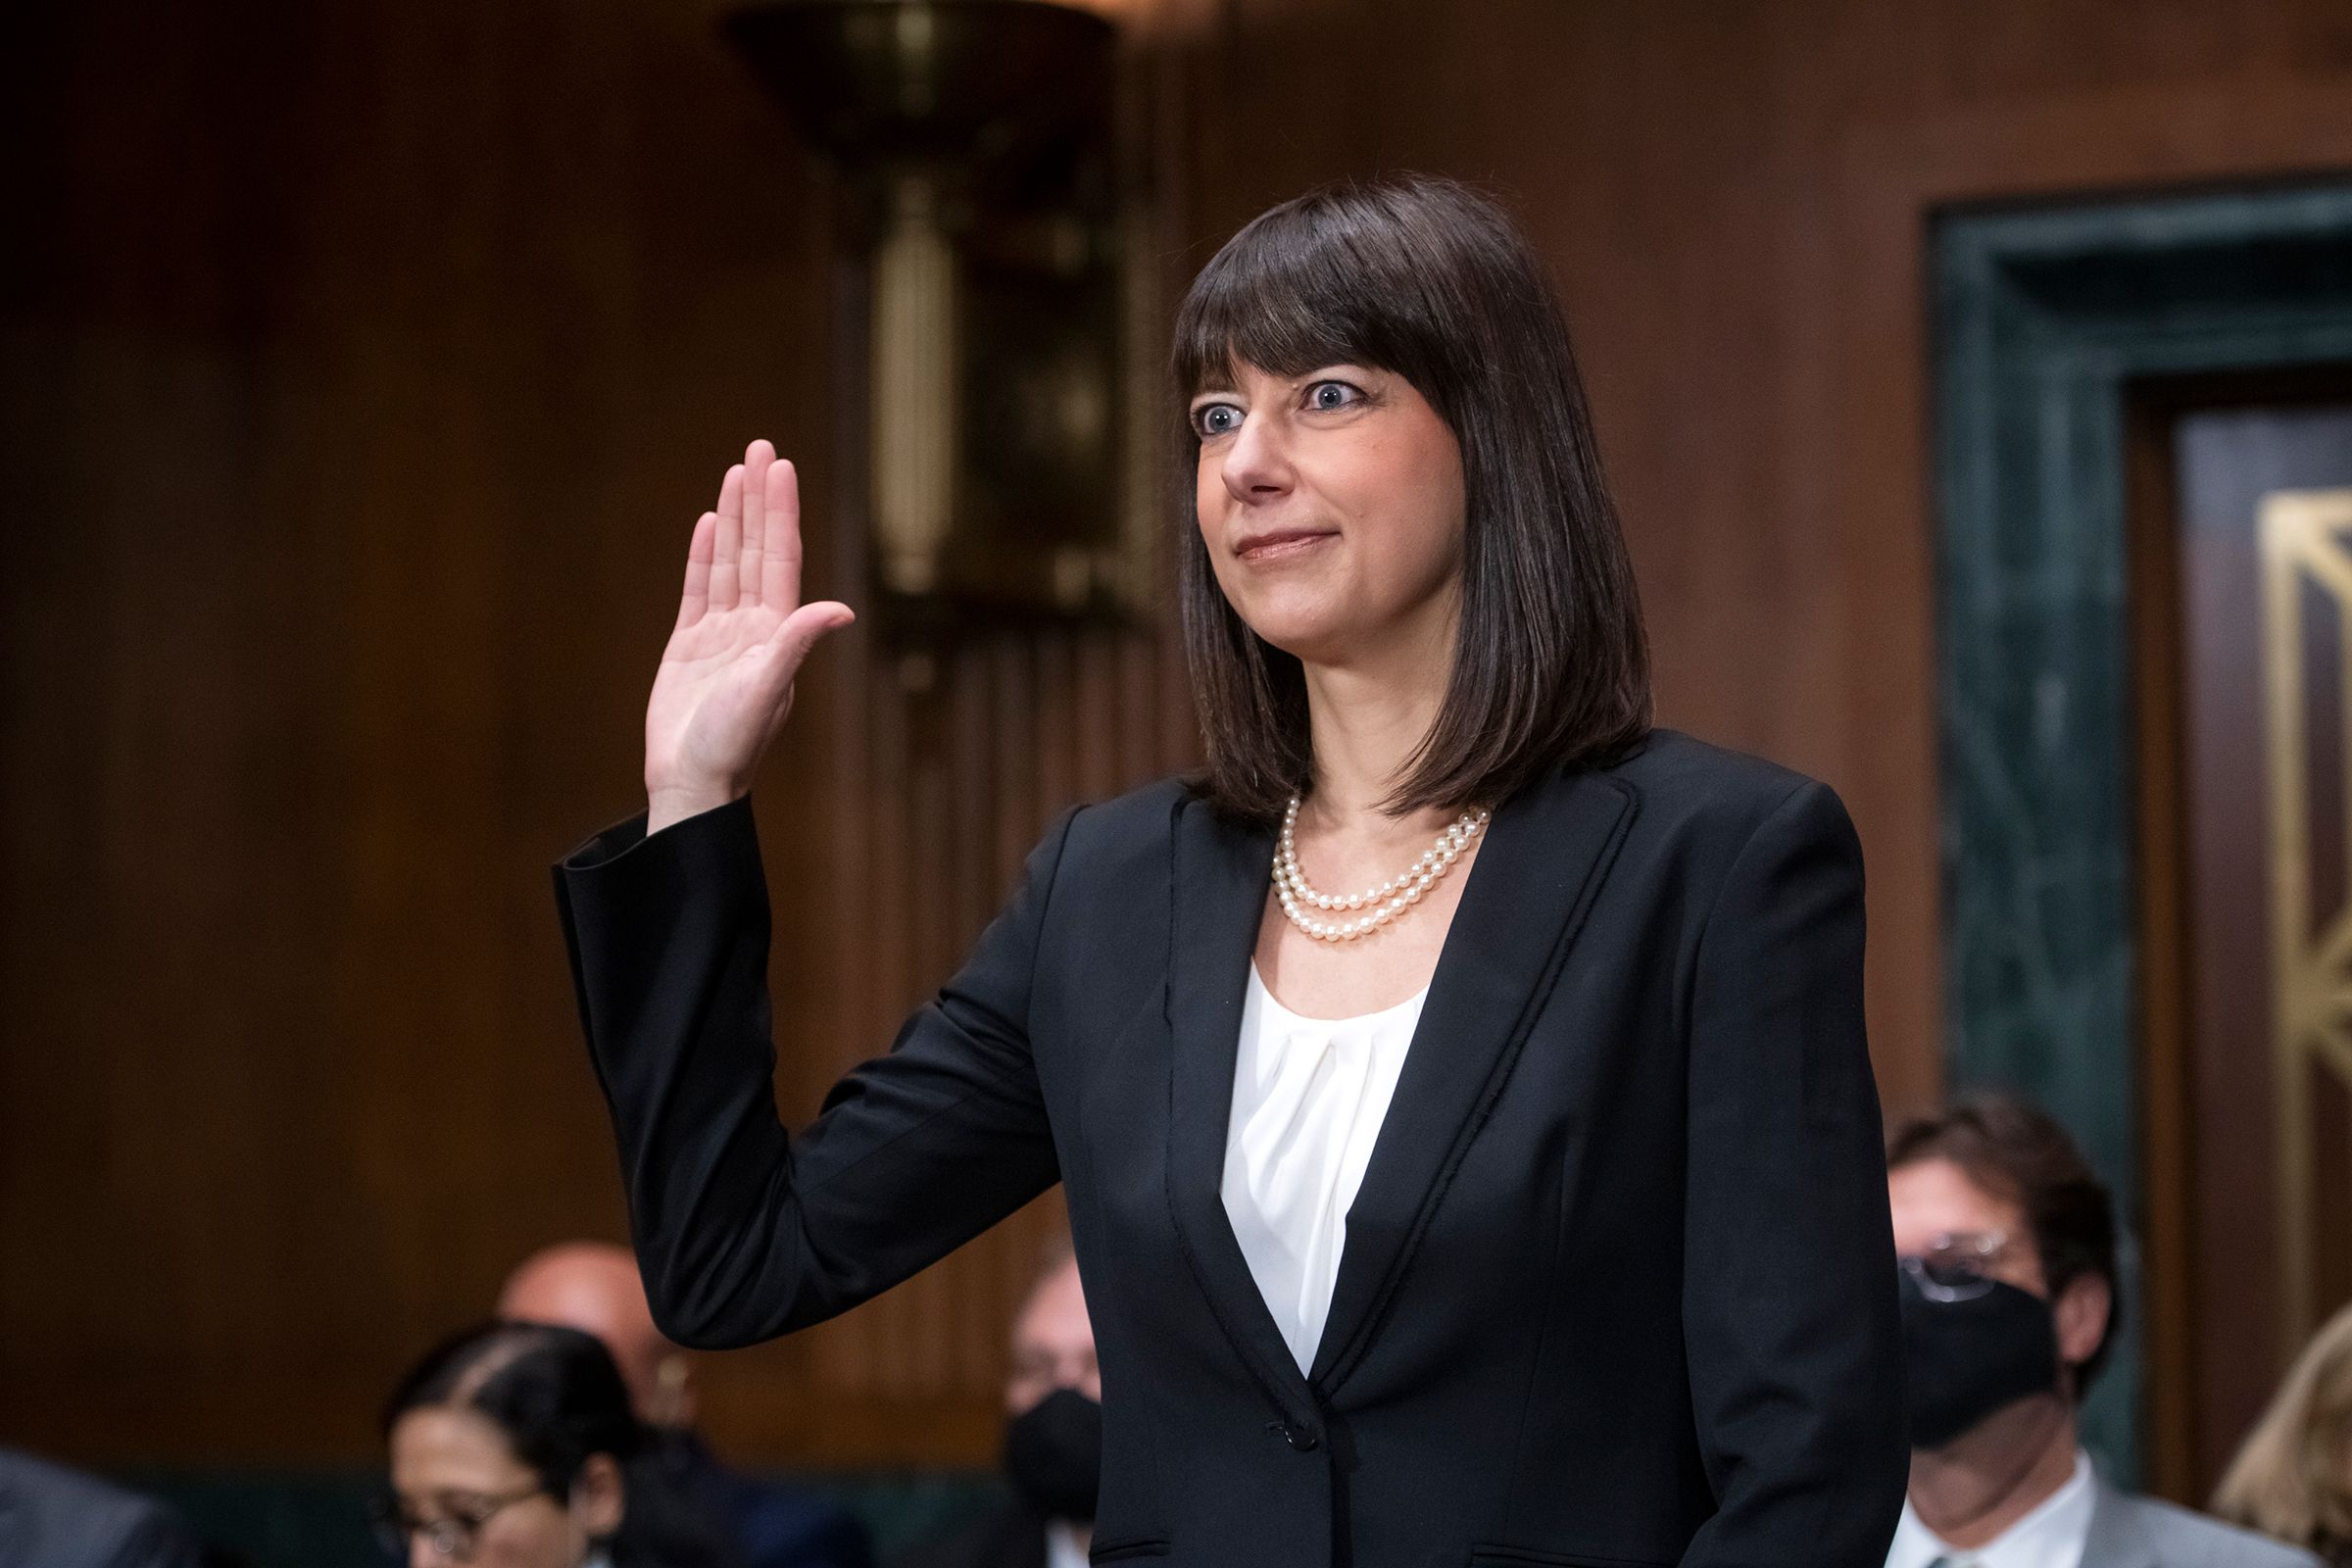 In this September 2021 photo, Elizabeth Prelogar is sworn-in as she appears before a Senate Committee on the Judiciary for her nomination hearing to be Solicitor General of the United States, in the Dirksen Senate Office Building in Washington, DC.